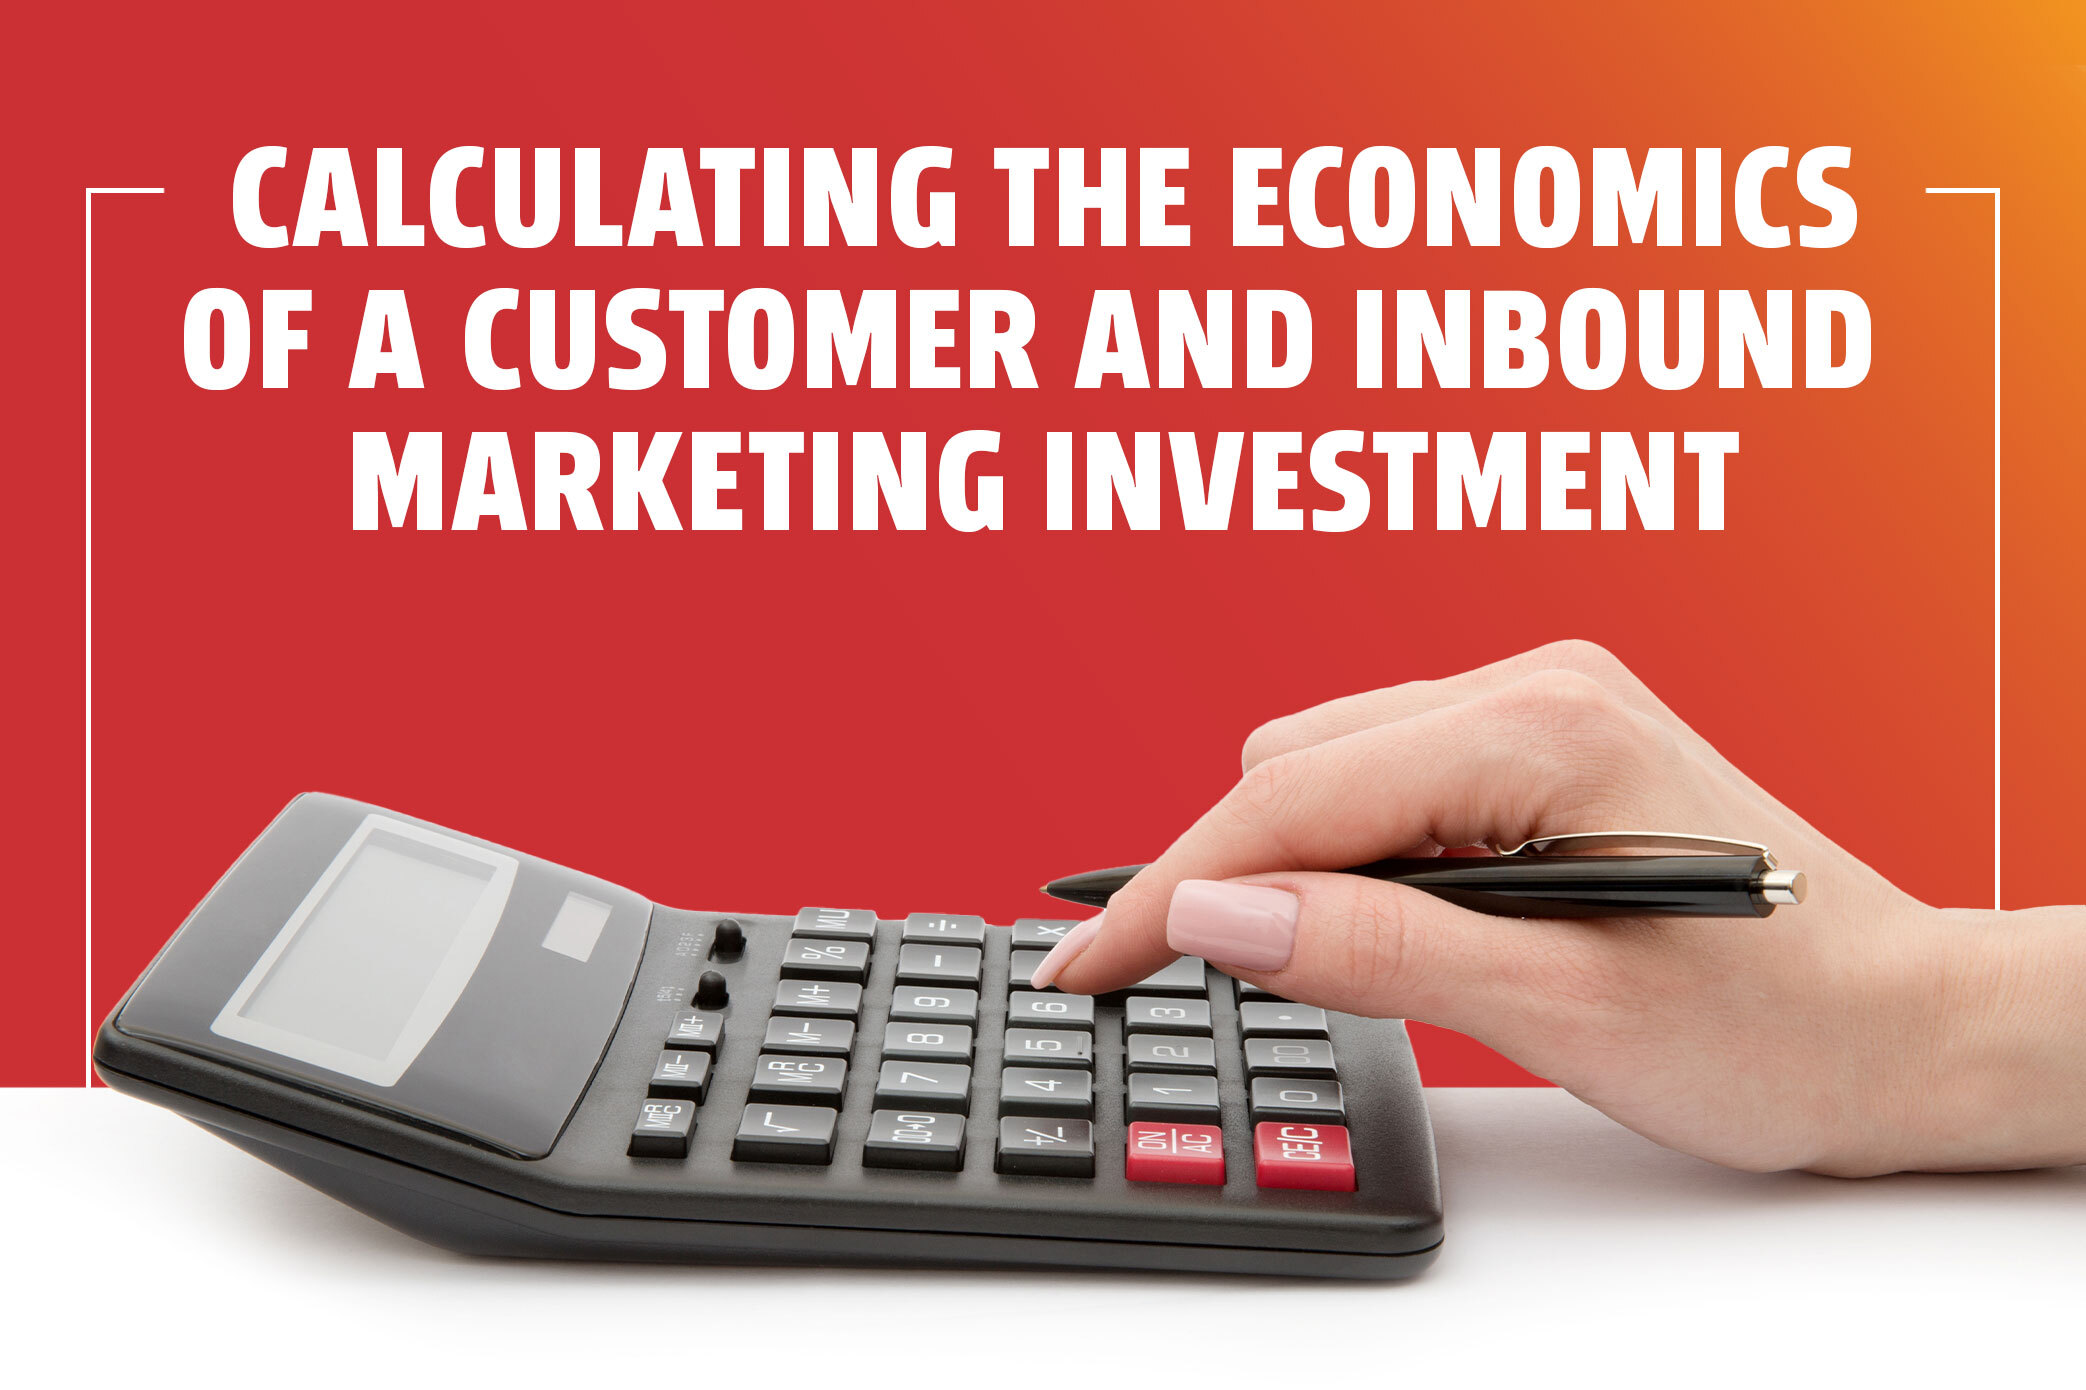 Calculating the Economics of a Customer and Inbound Marketing Investment